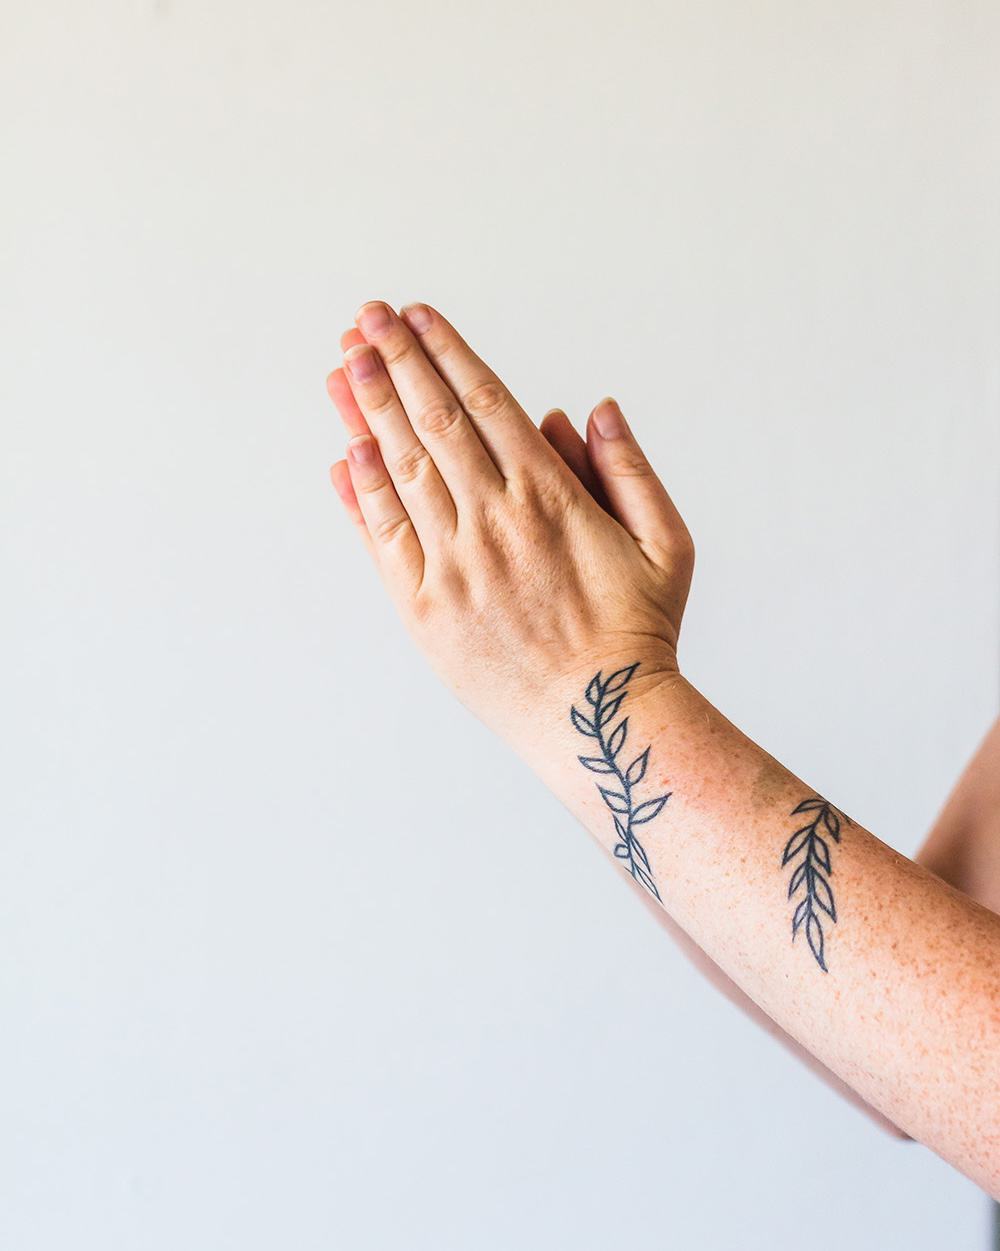 A person with their hands in anjali mudra or namaste position. They have a tattoo of leaves wrapped around their forearm.